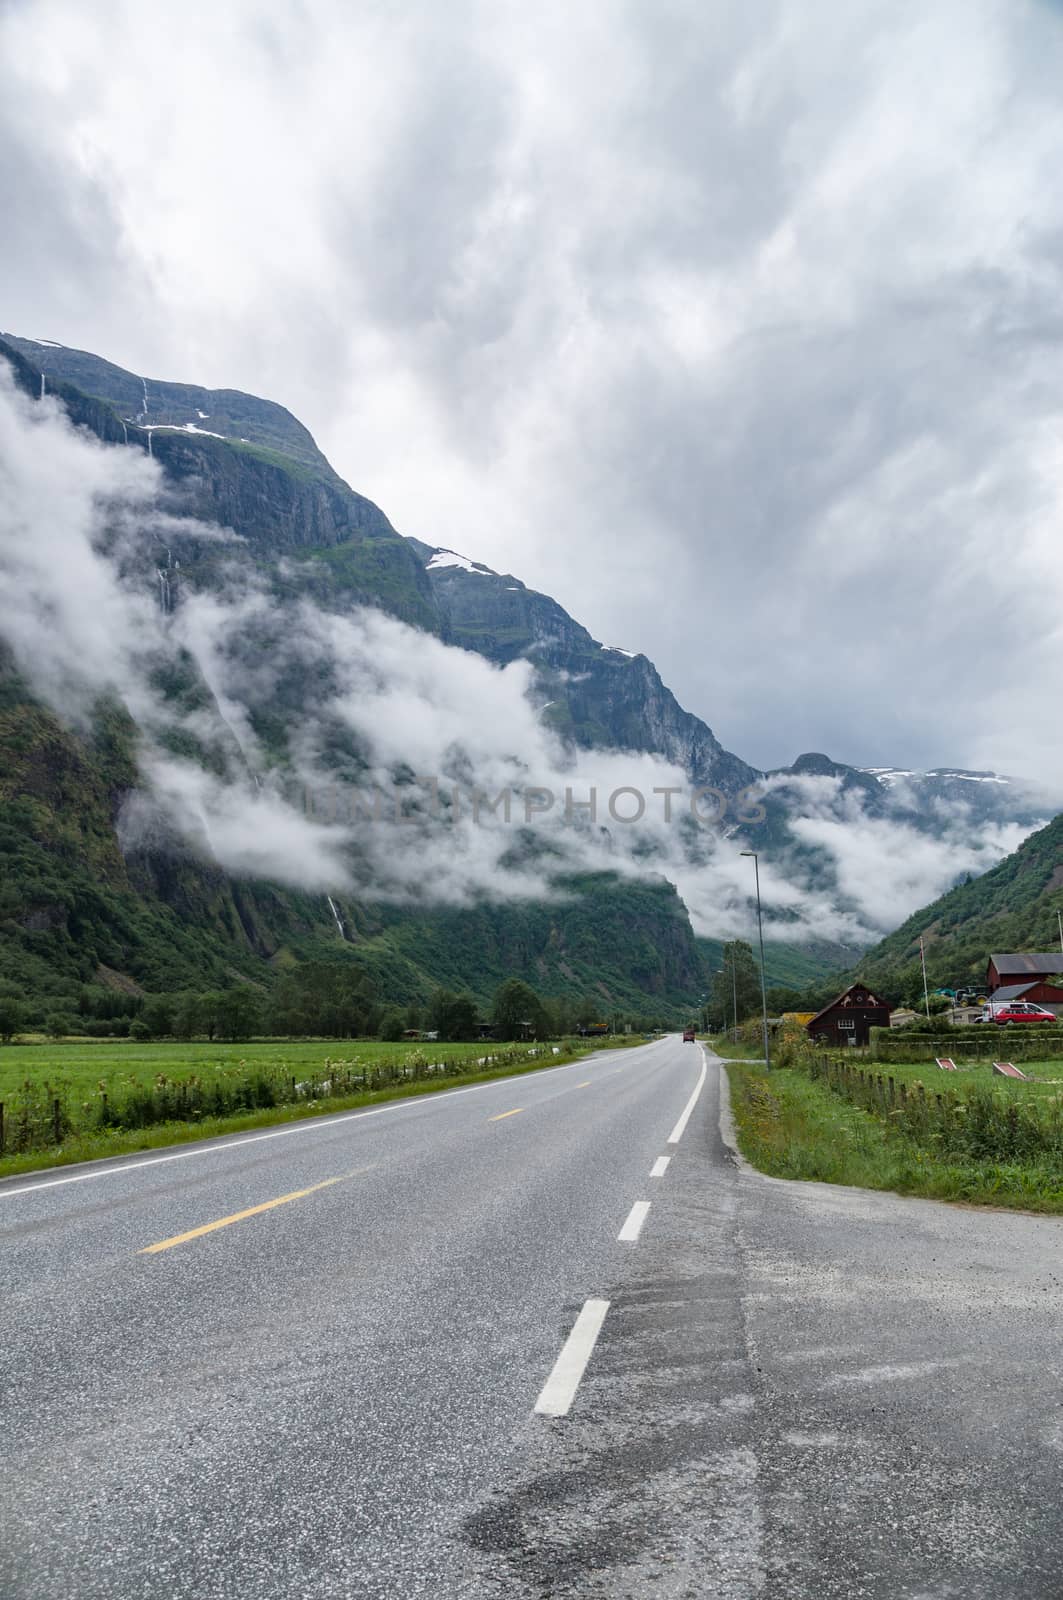 Misty mountains covered by clouds and vanishing road near Gudvangen village, Norway